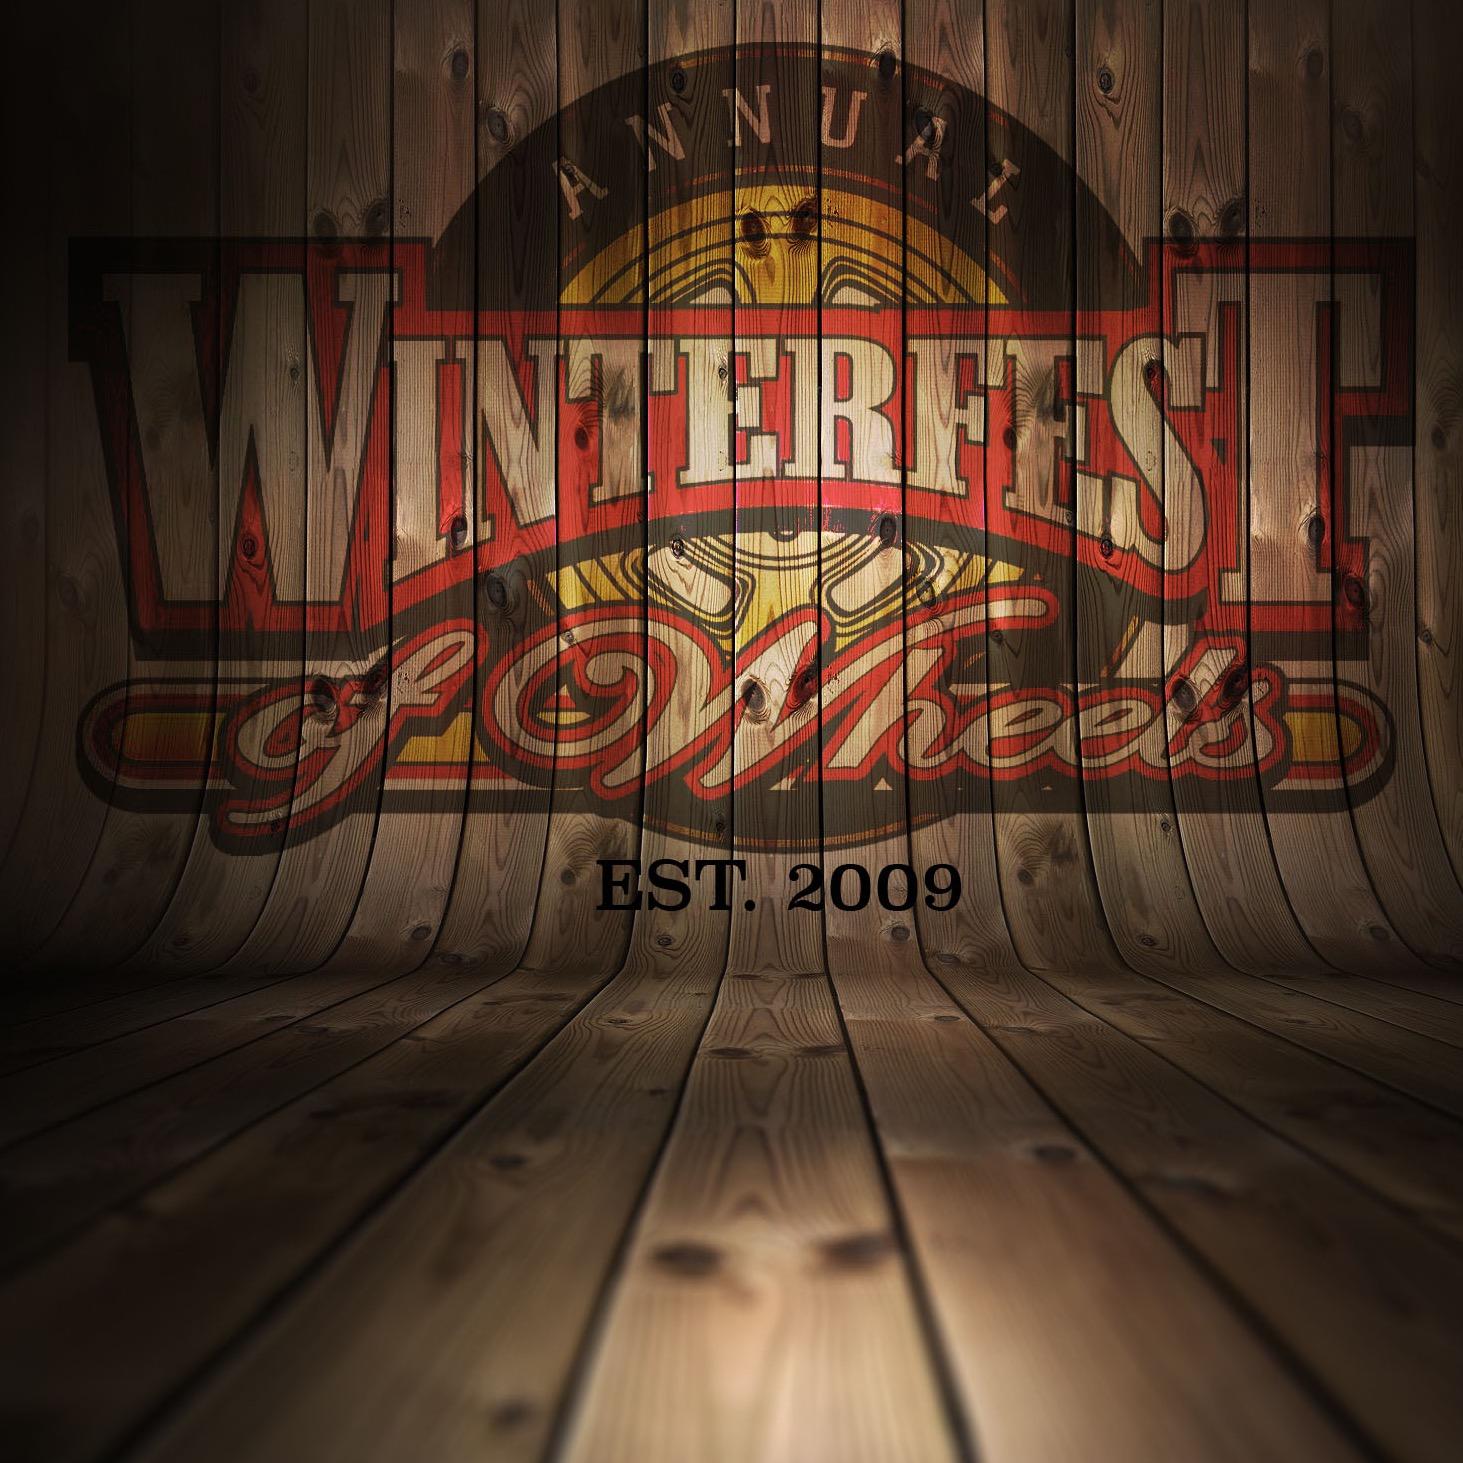 Winterfest of Wheels is a non-profit car show bringing high quality cars, trucks, and motorcycles to Sioux Falls. All the proceeds go to Cure Kids Cancer.